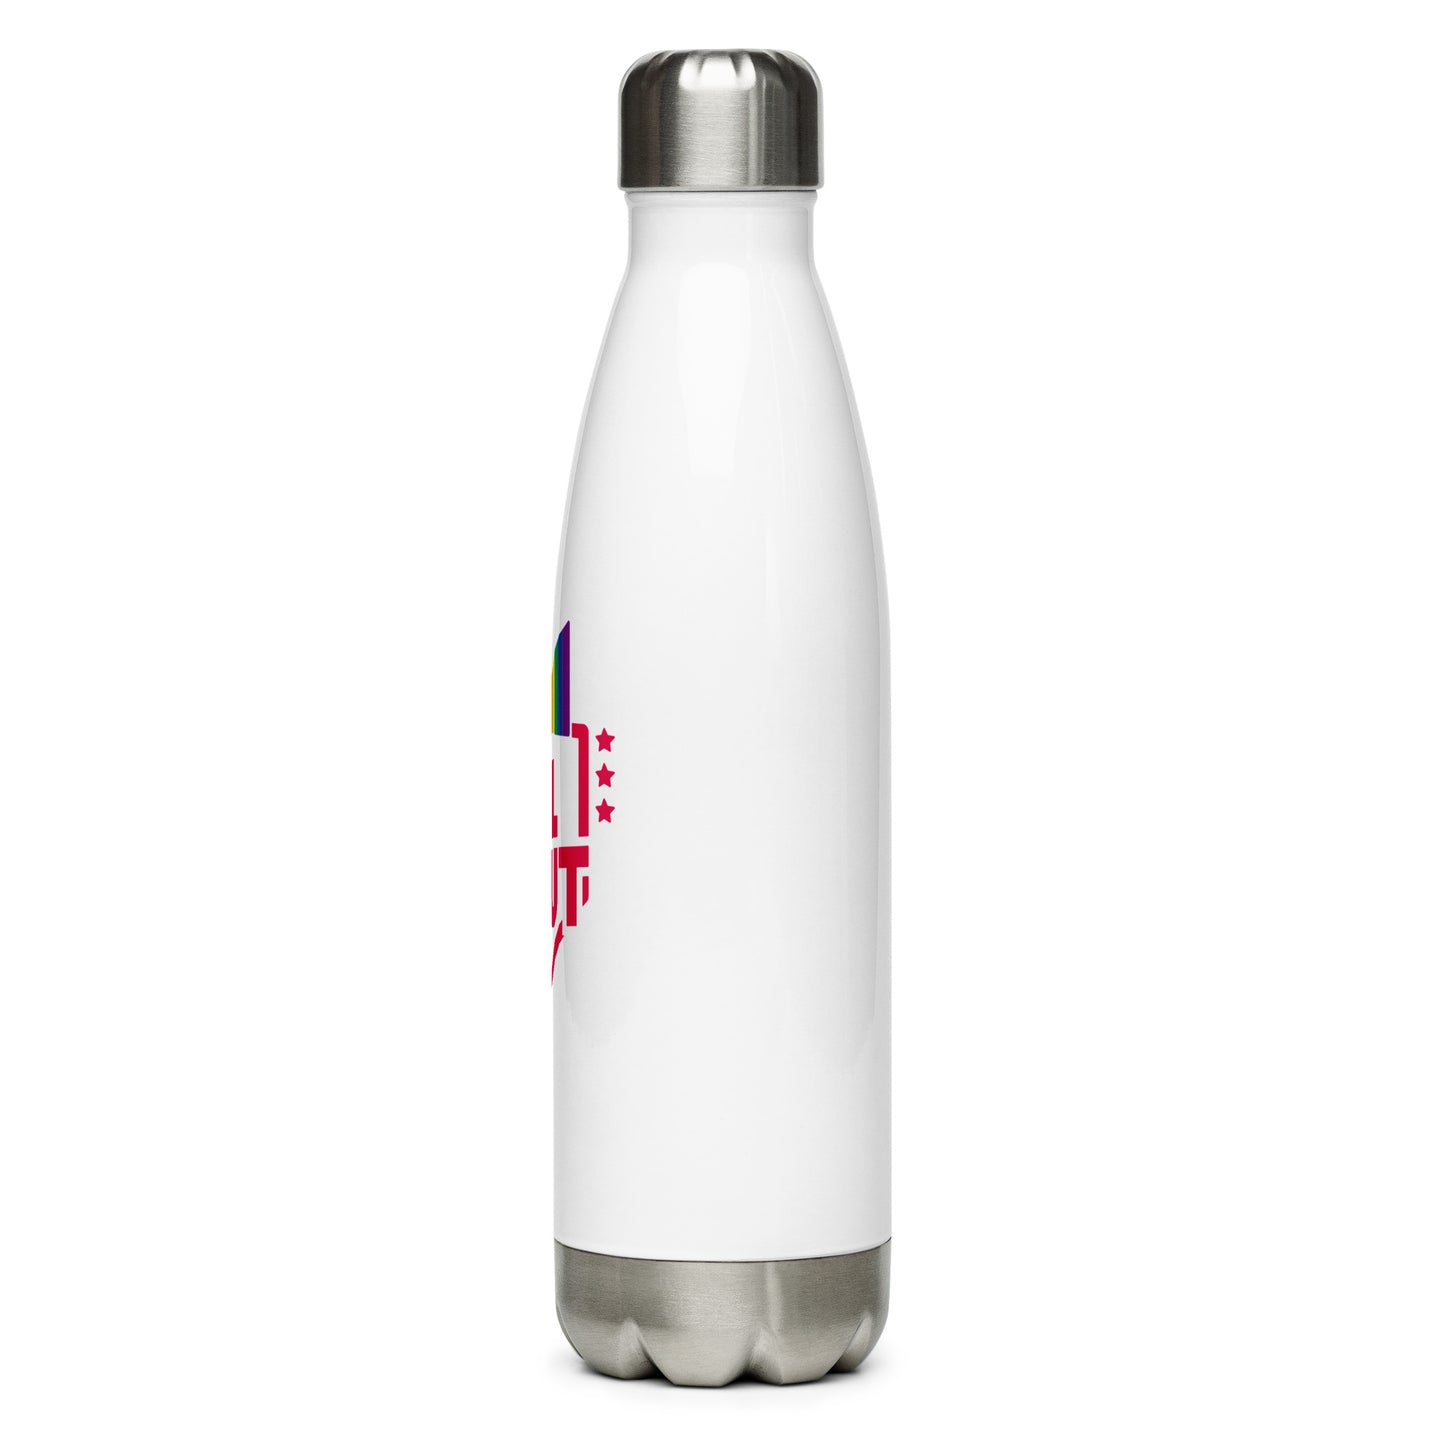 All Out - Stainless Steel Water Bottle